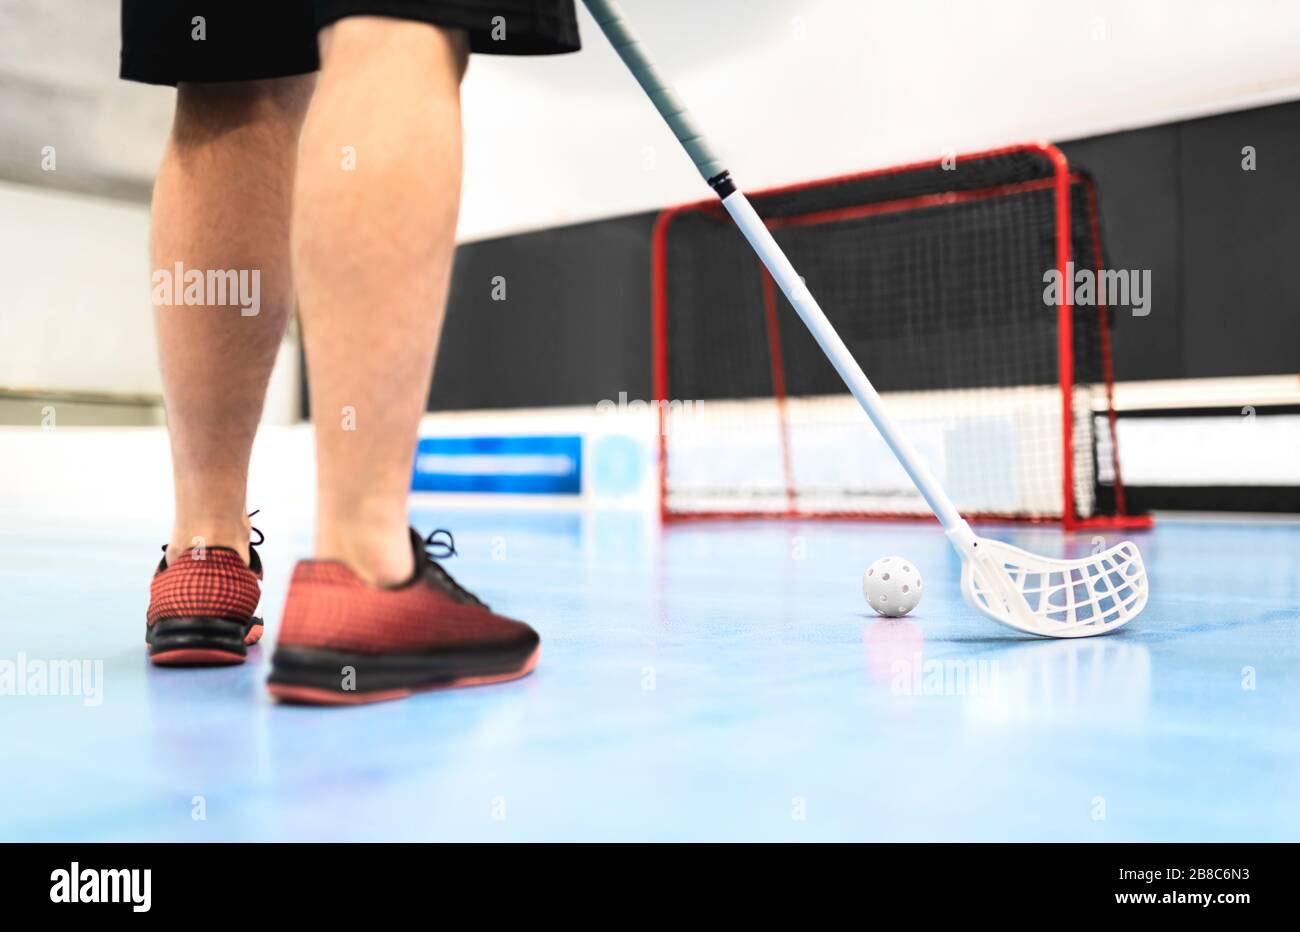 Back view of floorball player training with stick, ball and goal on court. Man playing in floor hockey arena. Stock Photo